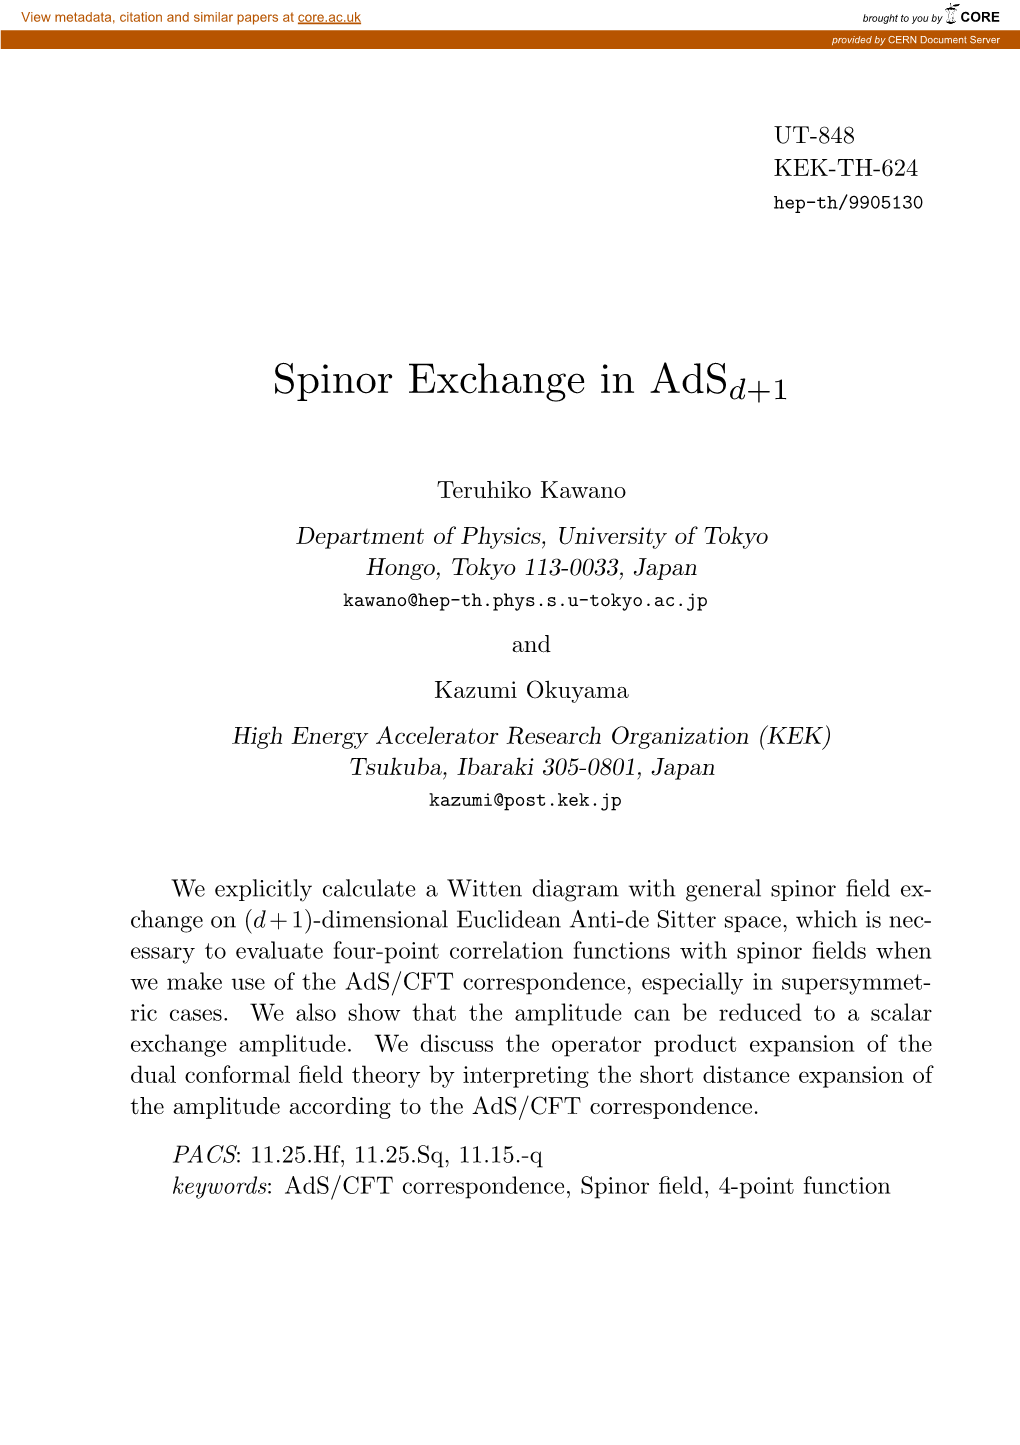 Spinor Exchange in Adsd+1